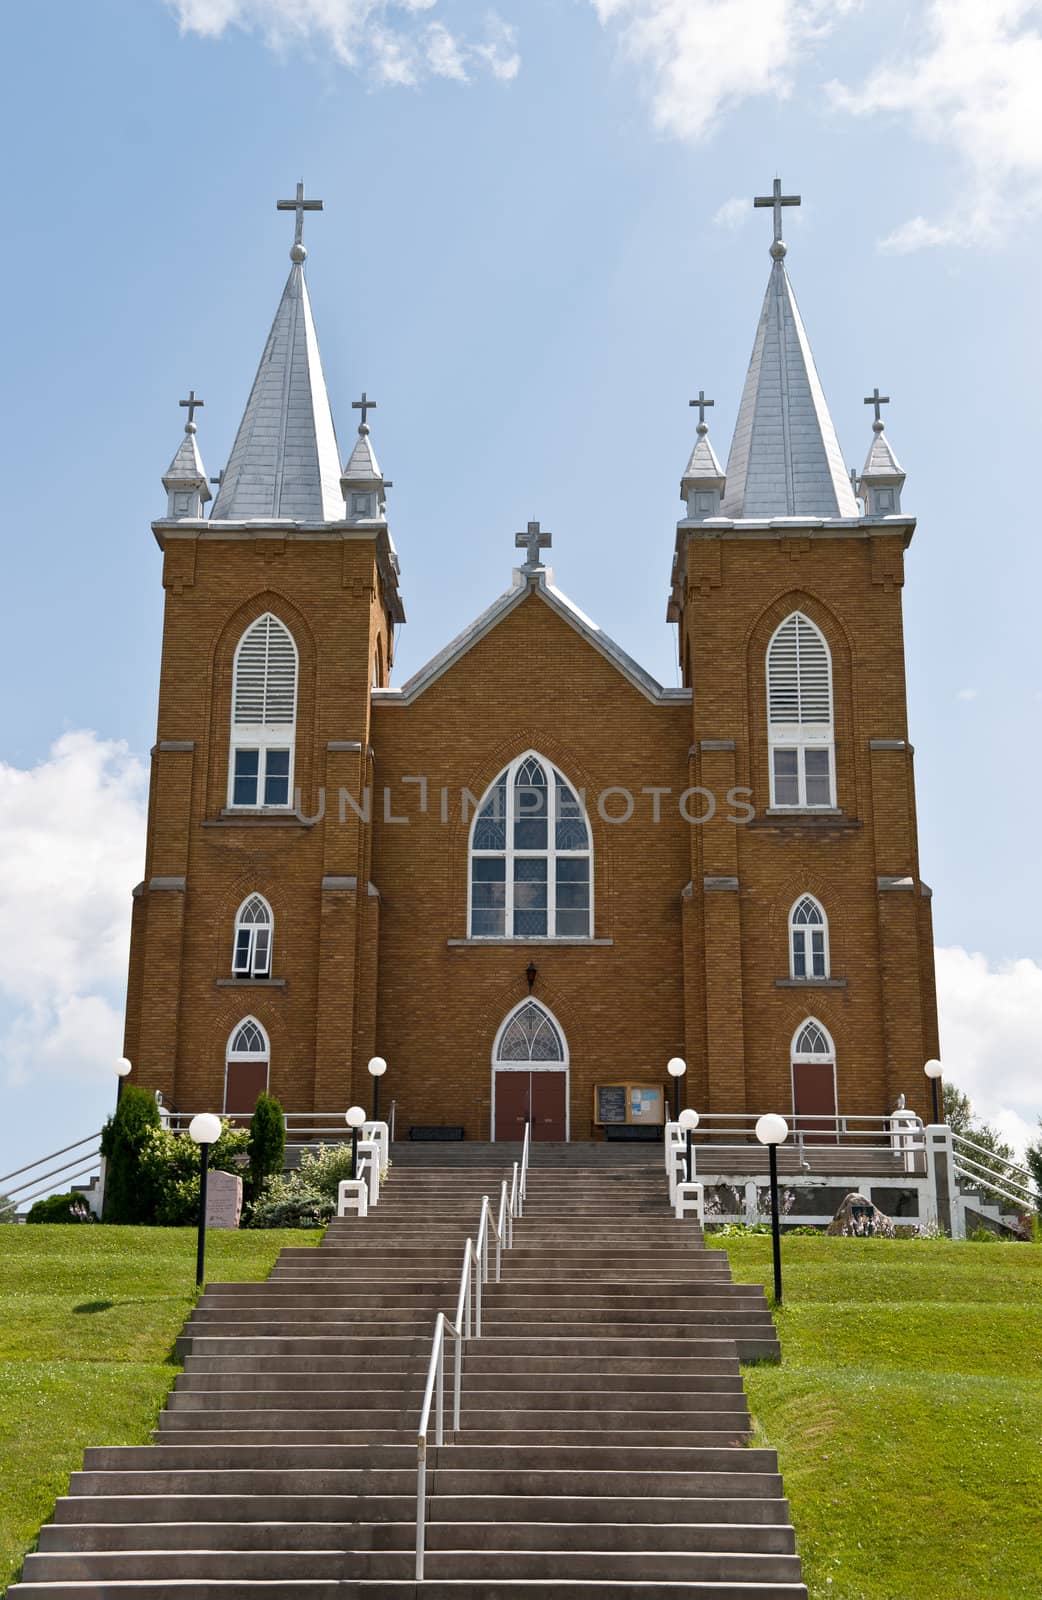 St. Mary's church and the cross in Wilno Ontario Canada